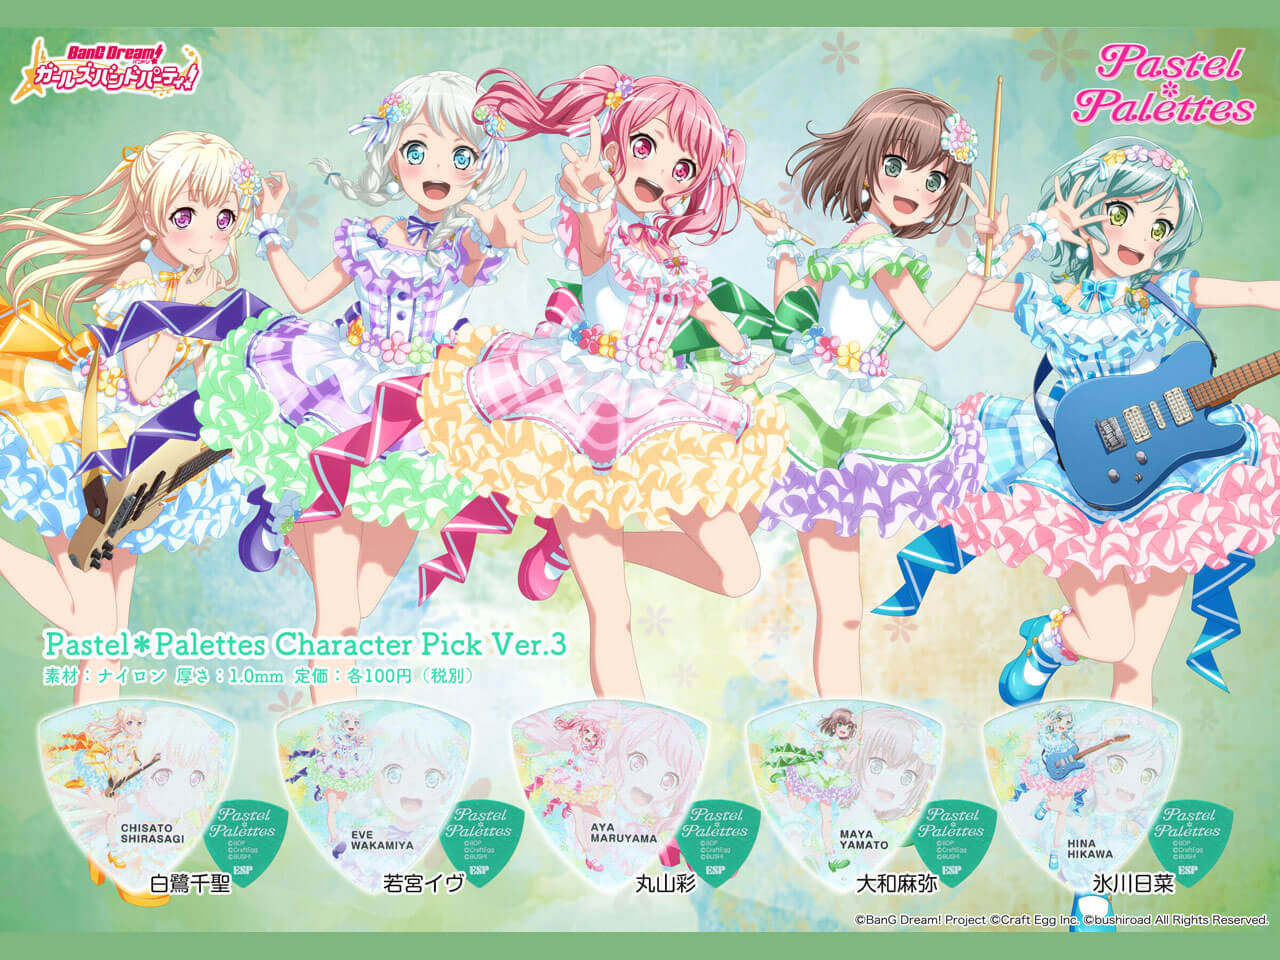 【ESP×BanG Dream!コラボピック】Pastel*Palettes Character Pick Ver.3 "白鷺千聖"（GBP CHISATO PASTEL PALETTES 3）＆”ハメパチ” セット